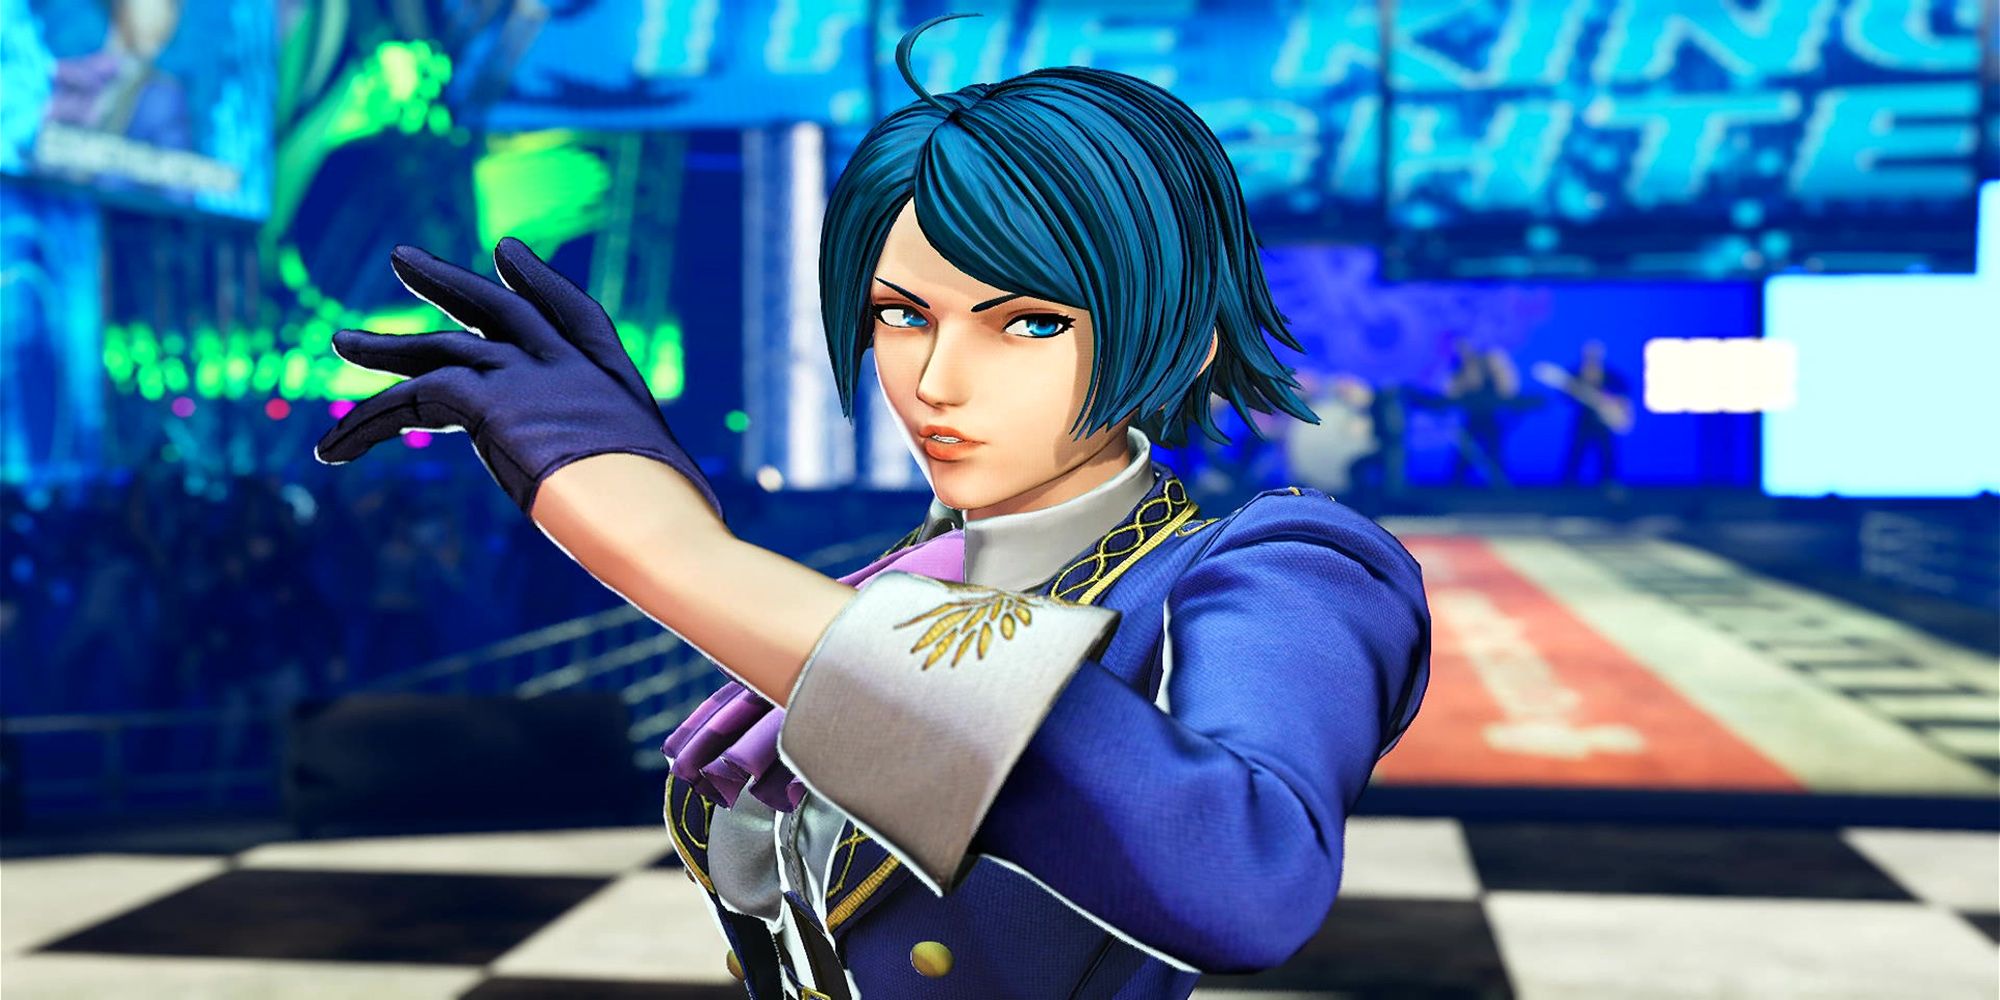 Elisabeth prepares to launch her Climax Super Special move, Fête de la Lumière, during a match at the Concert Hall. The King Of Fighters 15.